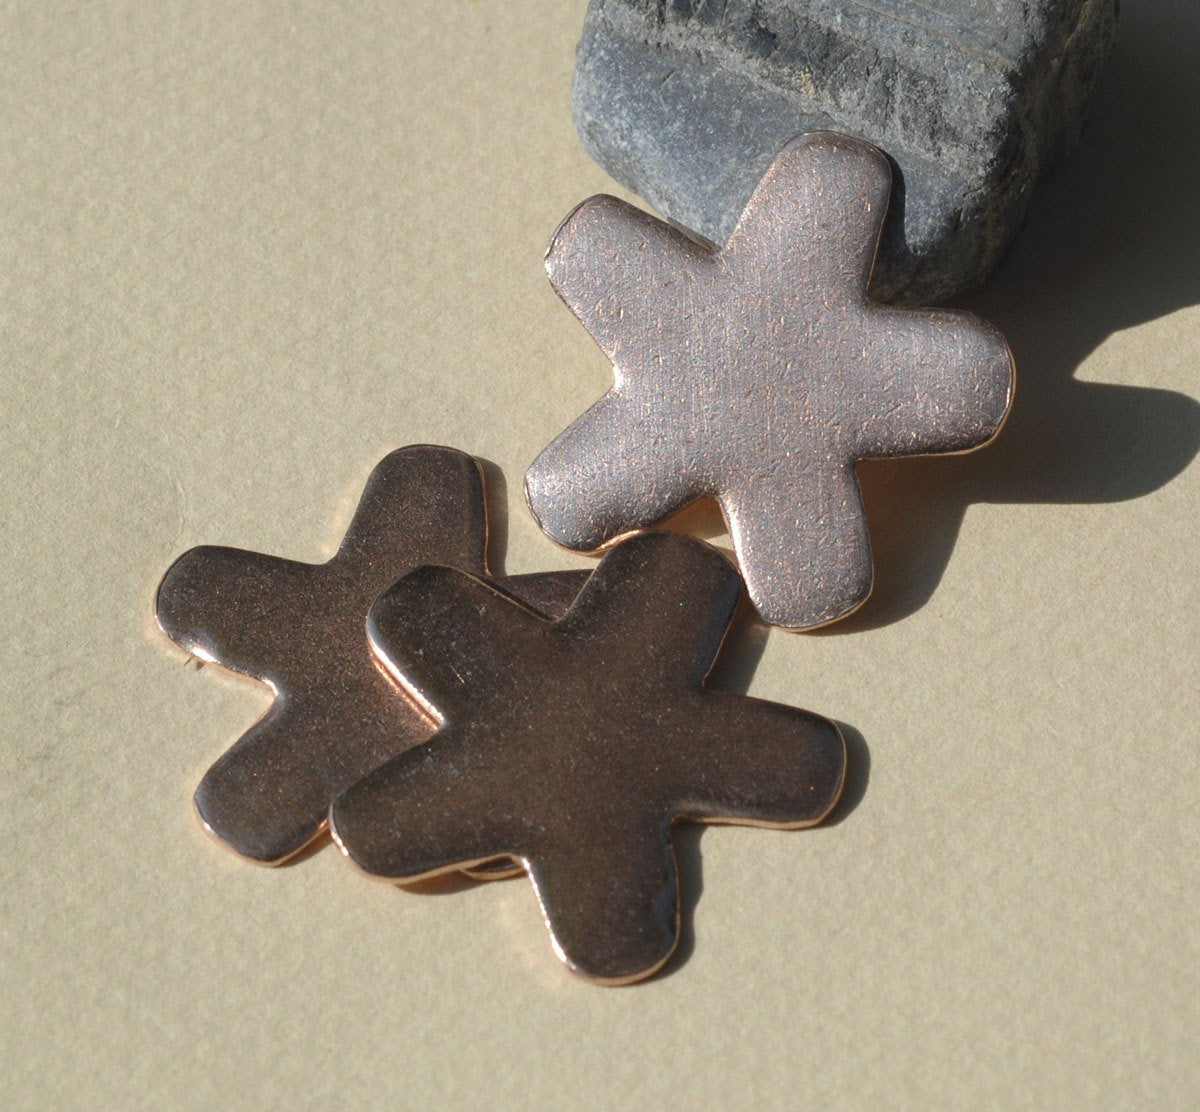 Metal Blanks 31mm Flower, Cutout for Enameling Stamping Soldering - Variety of Metals - 4 pieces